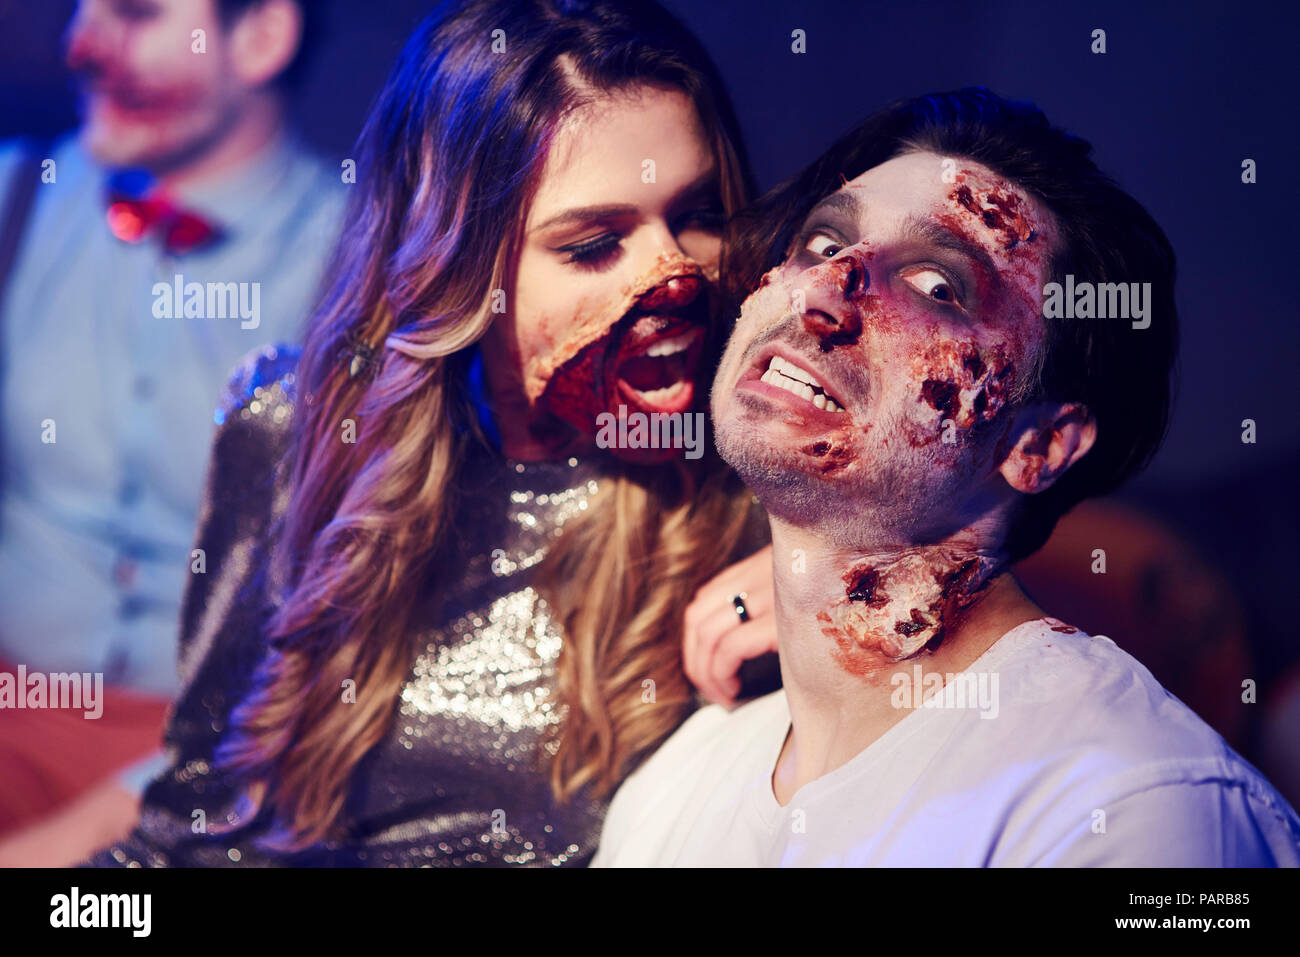 Creepy woman trying to bite her boyfriend at Halloween party Stock Photo